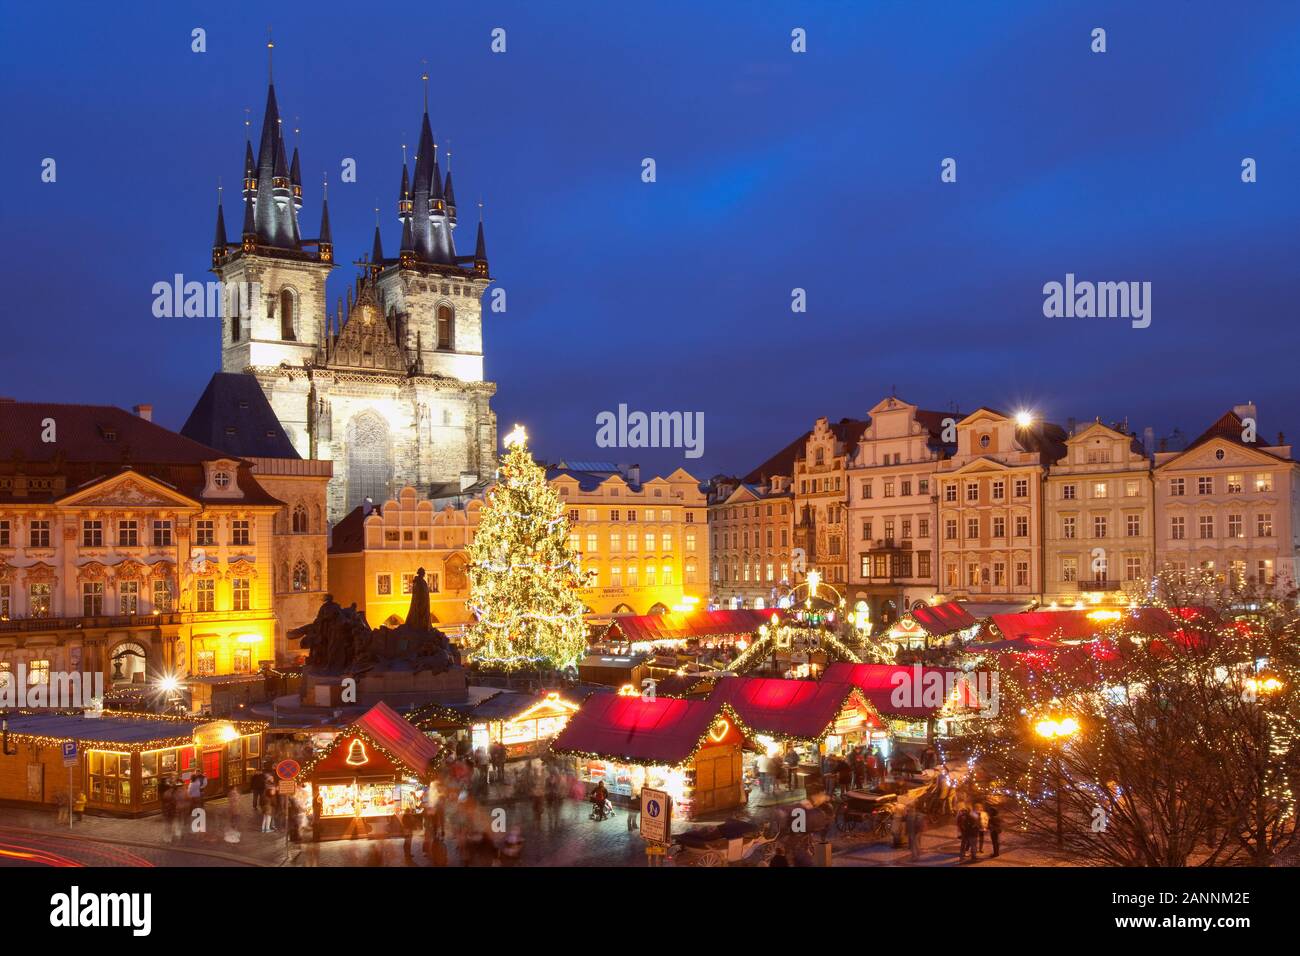 Czech Republic, Prague - Christmas Market at the Old Town Square Stock Photo